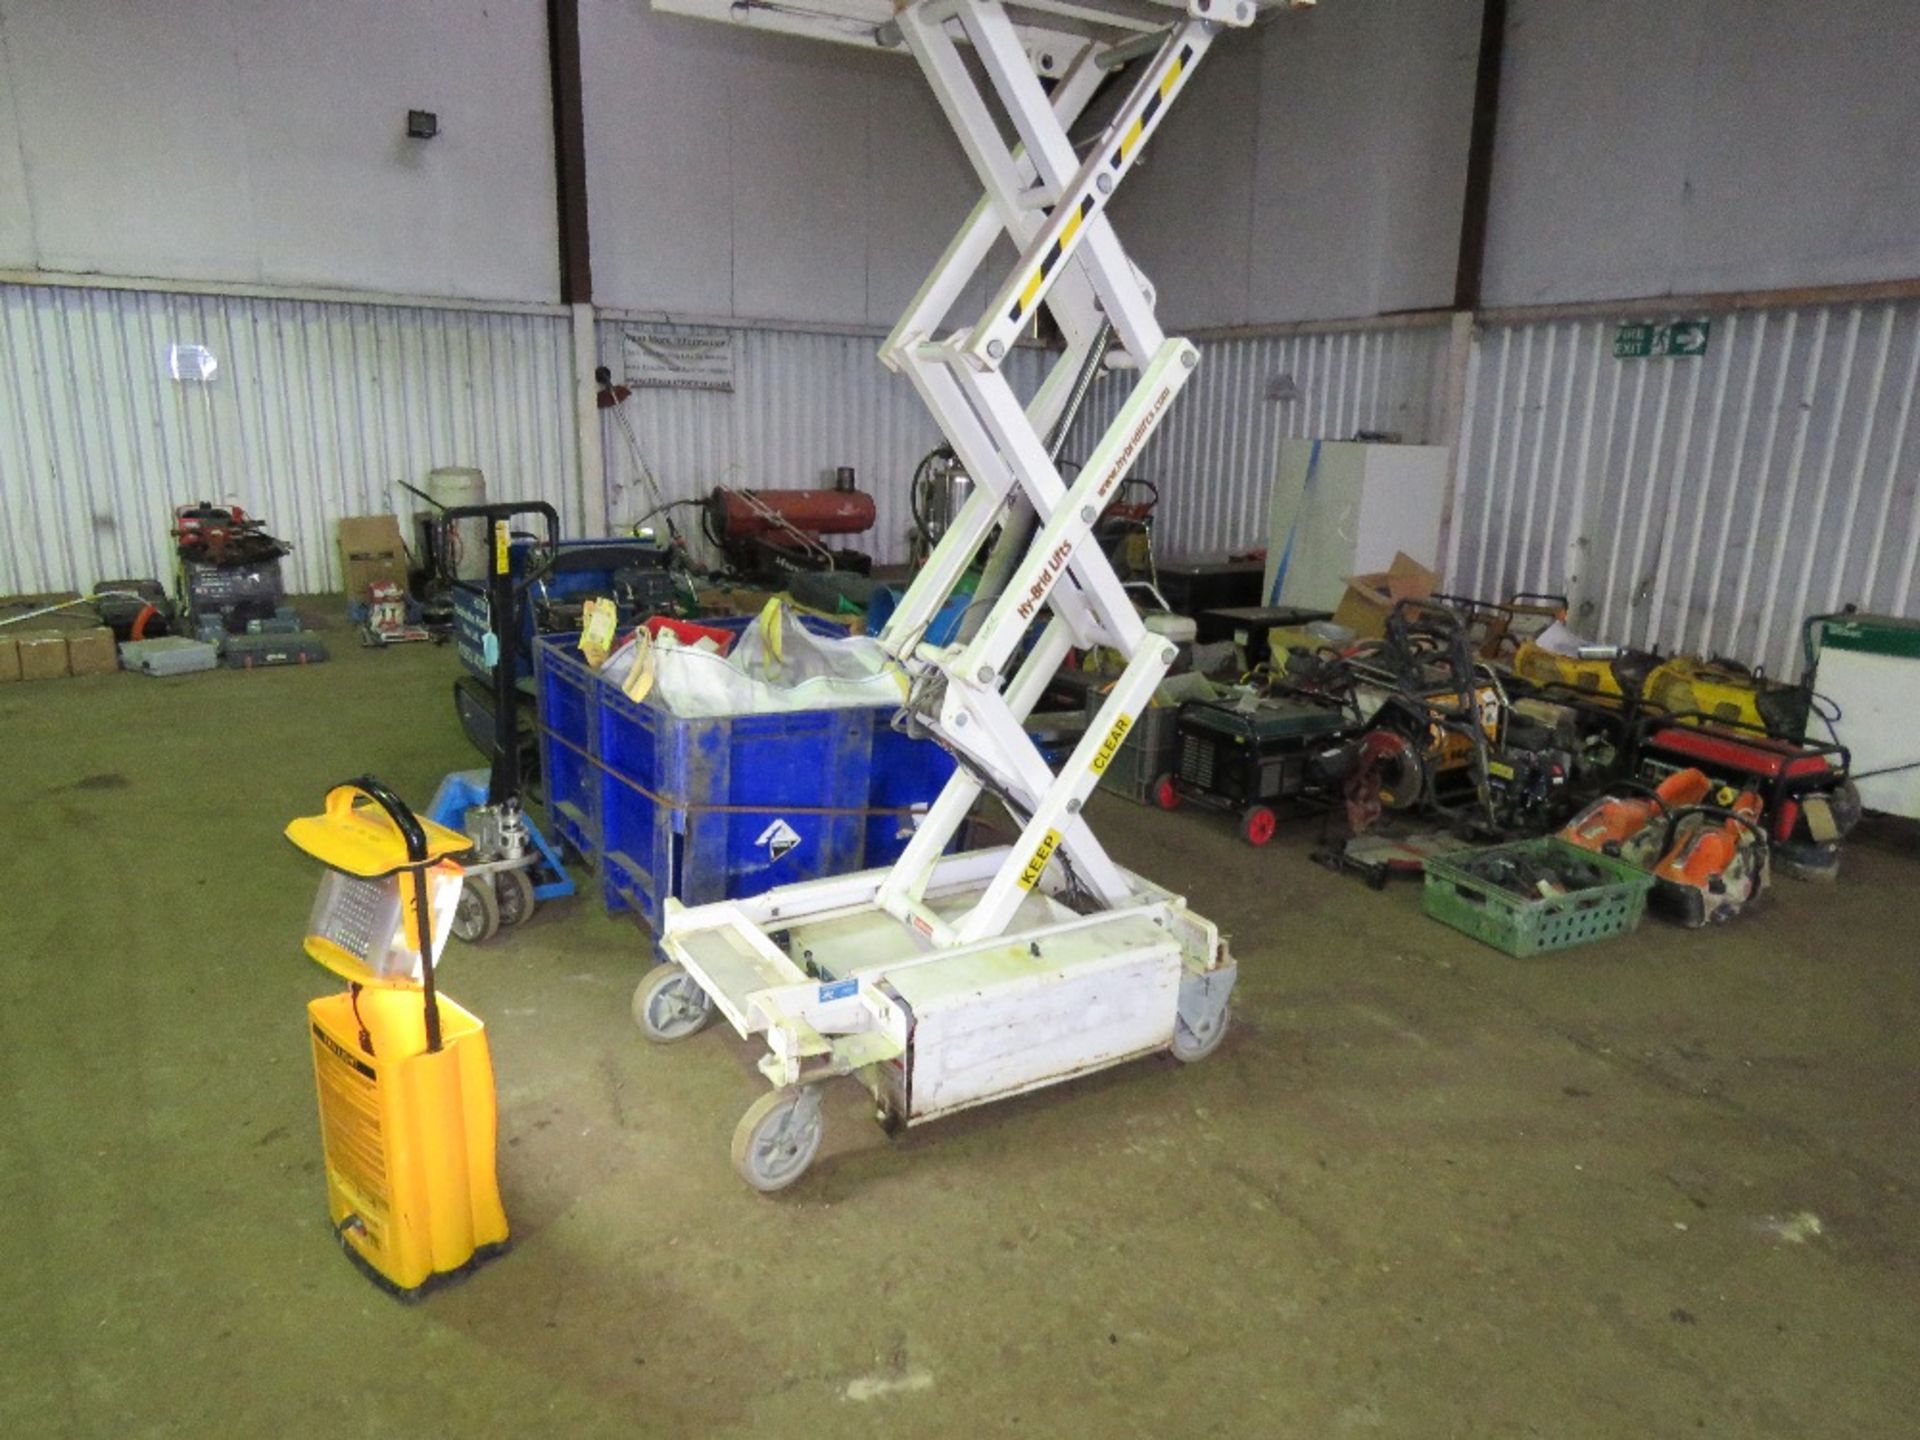 HYBRID HB830 SCISSOR LIFT ACCESS PLATFORM, 14FT MAX WORKING HEIGHT. SN:E0510228. WHEN TESTED WAS SEE - Image 2 of 4